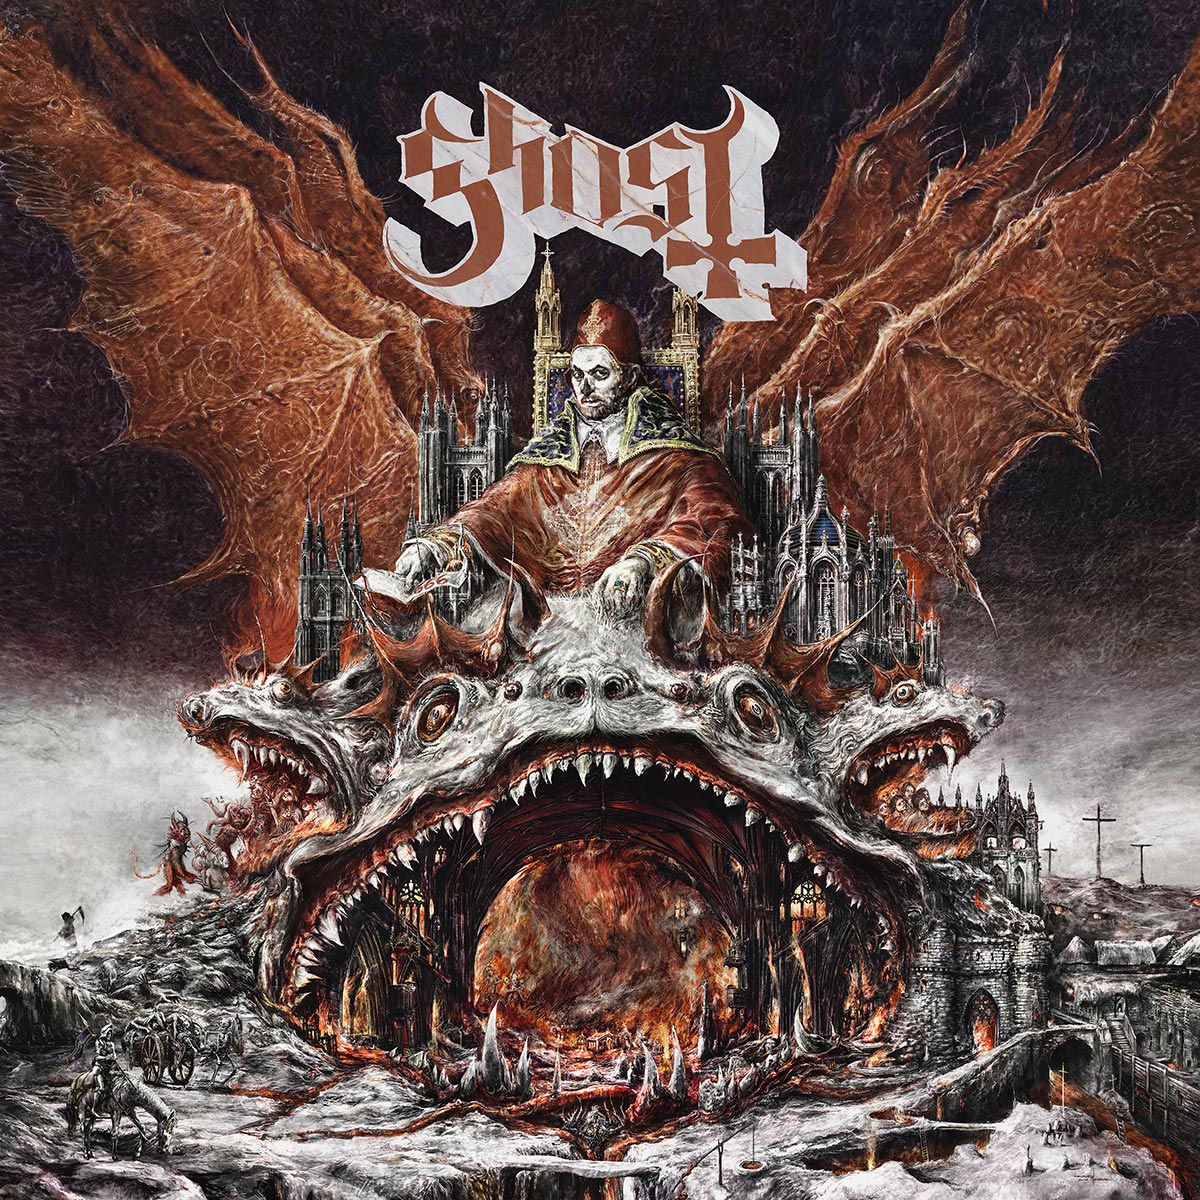 Ghost’s Prequelle is an echo of their once great narrative